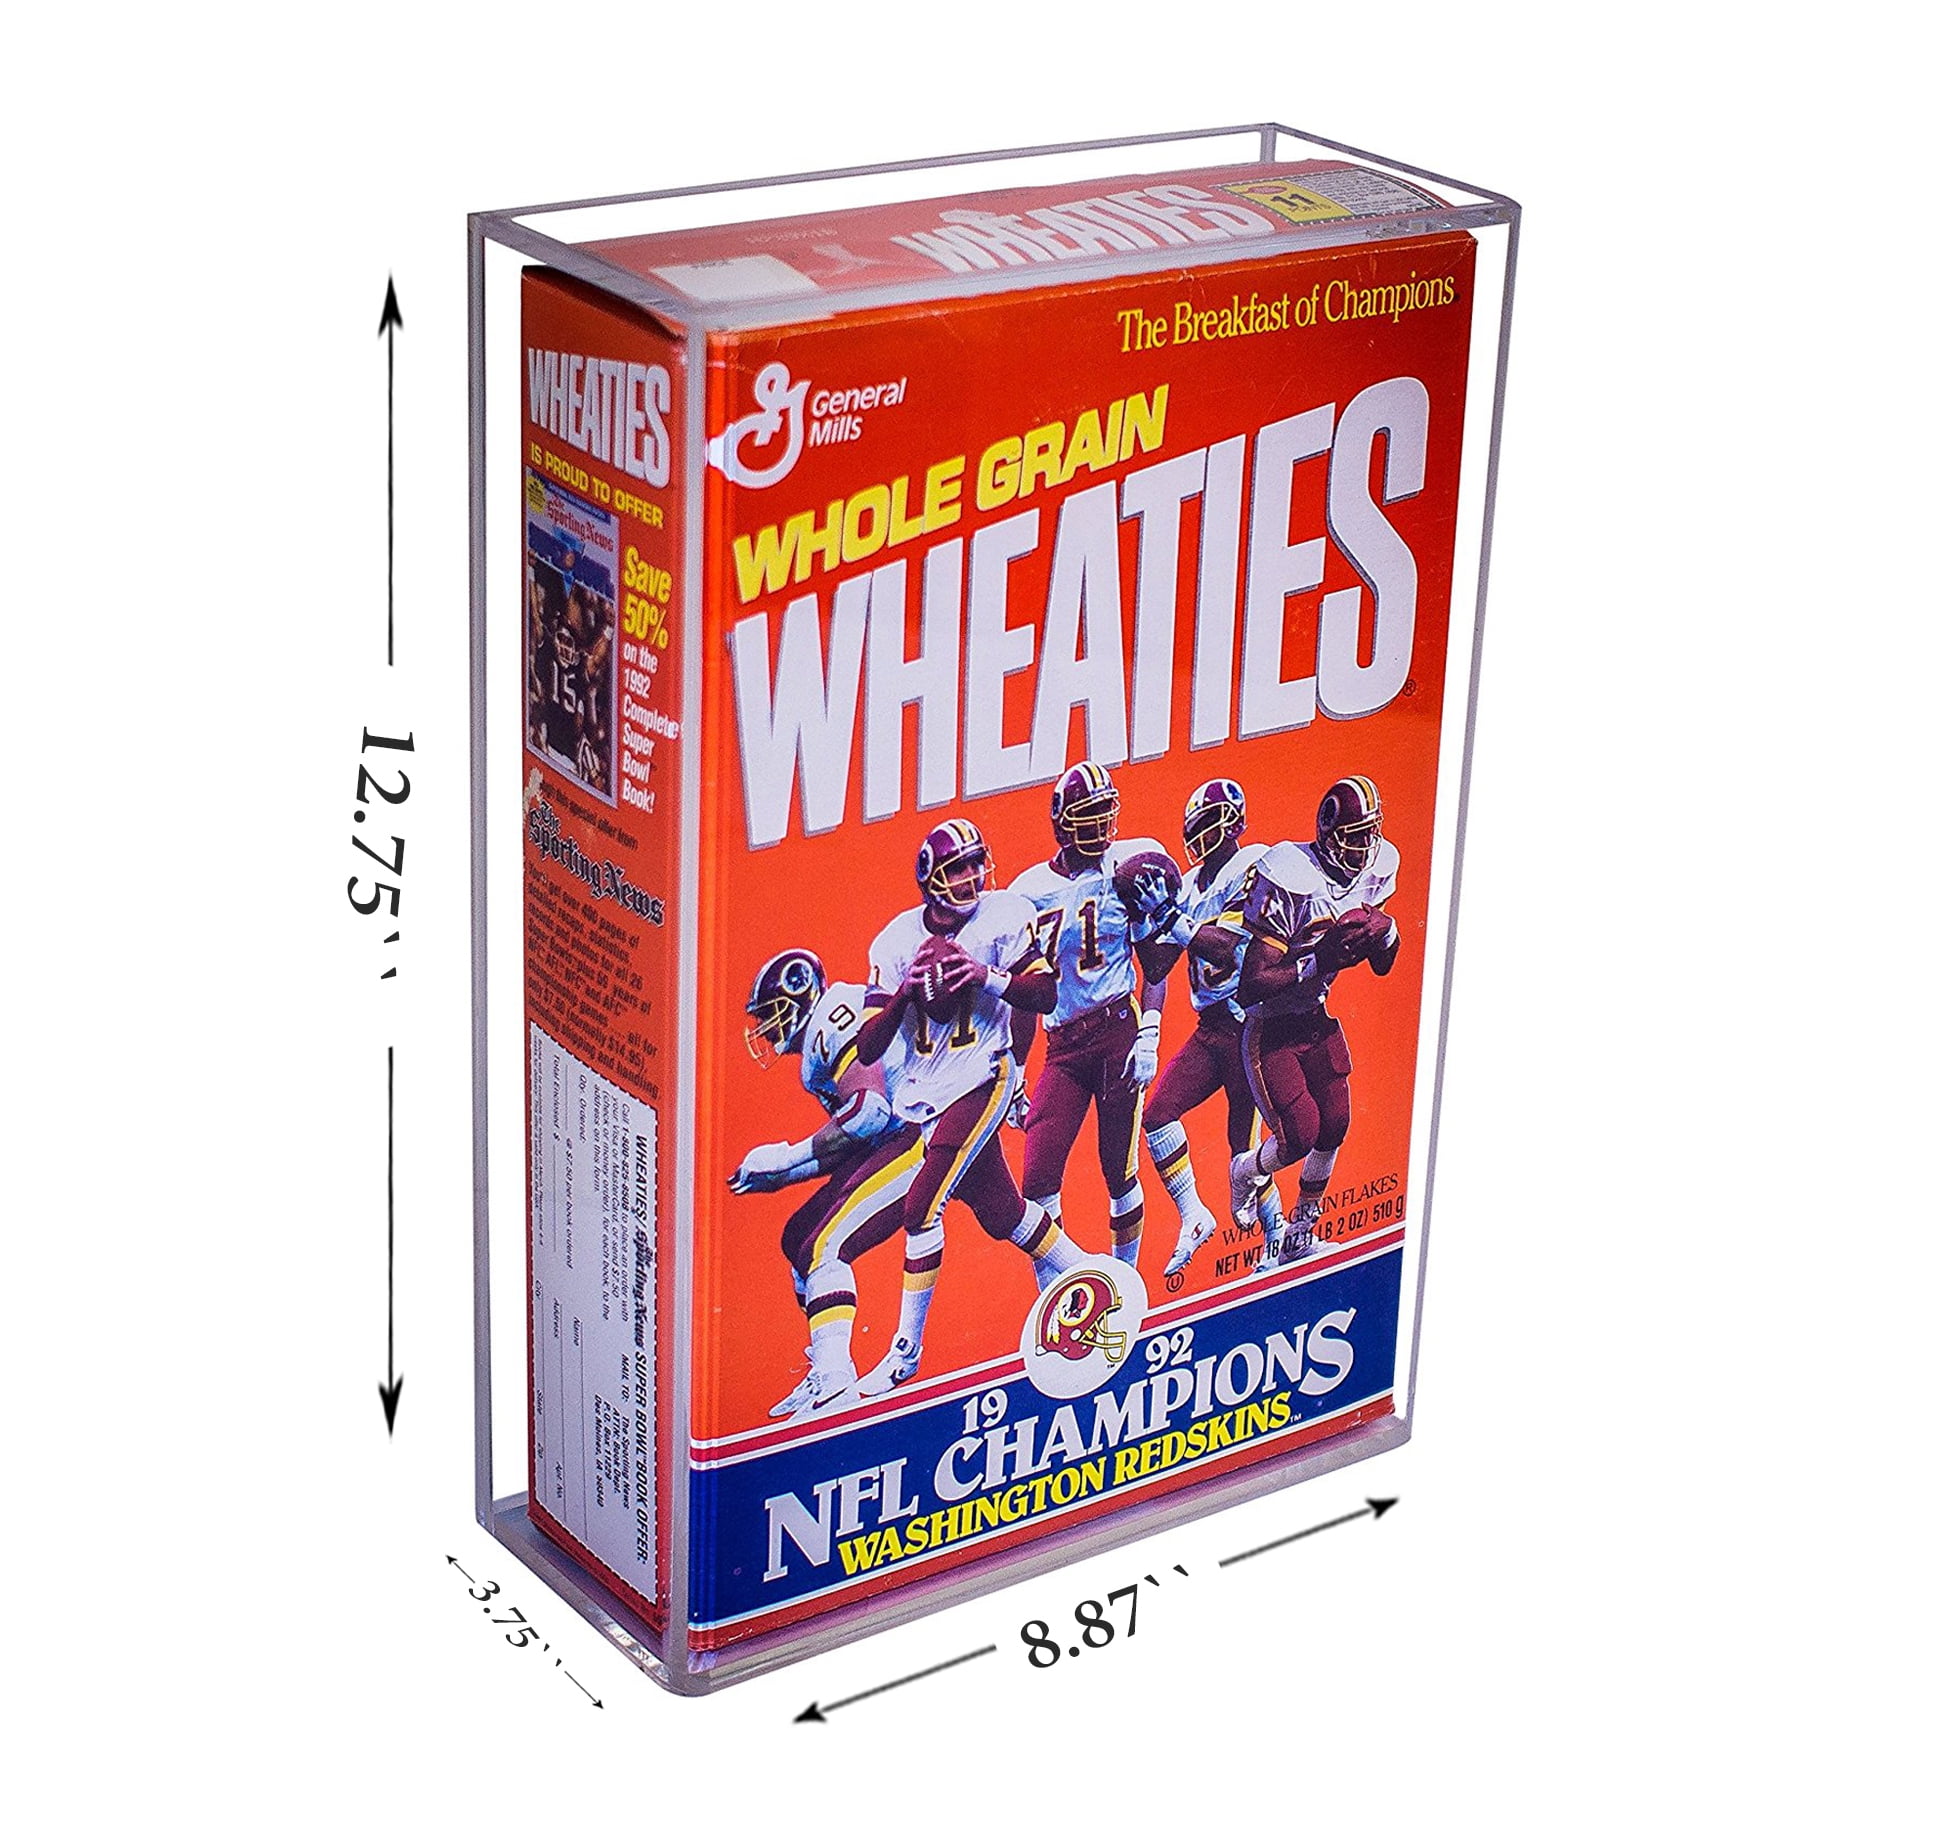 NEW WHEATIES 12 oz CEREAL BOX WALL MOUNT DISPLAY CASE 